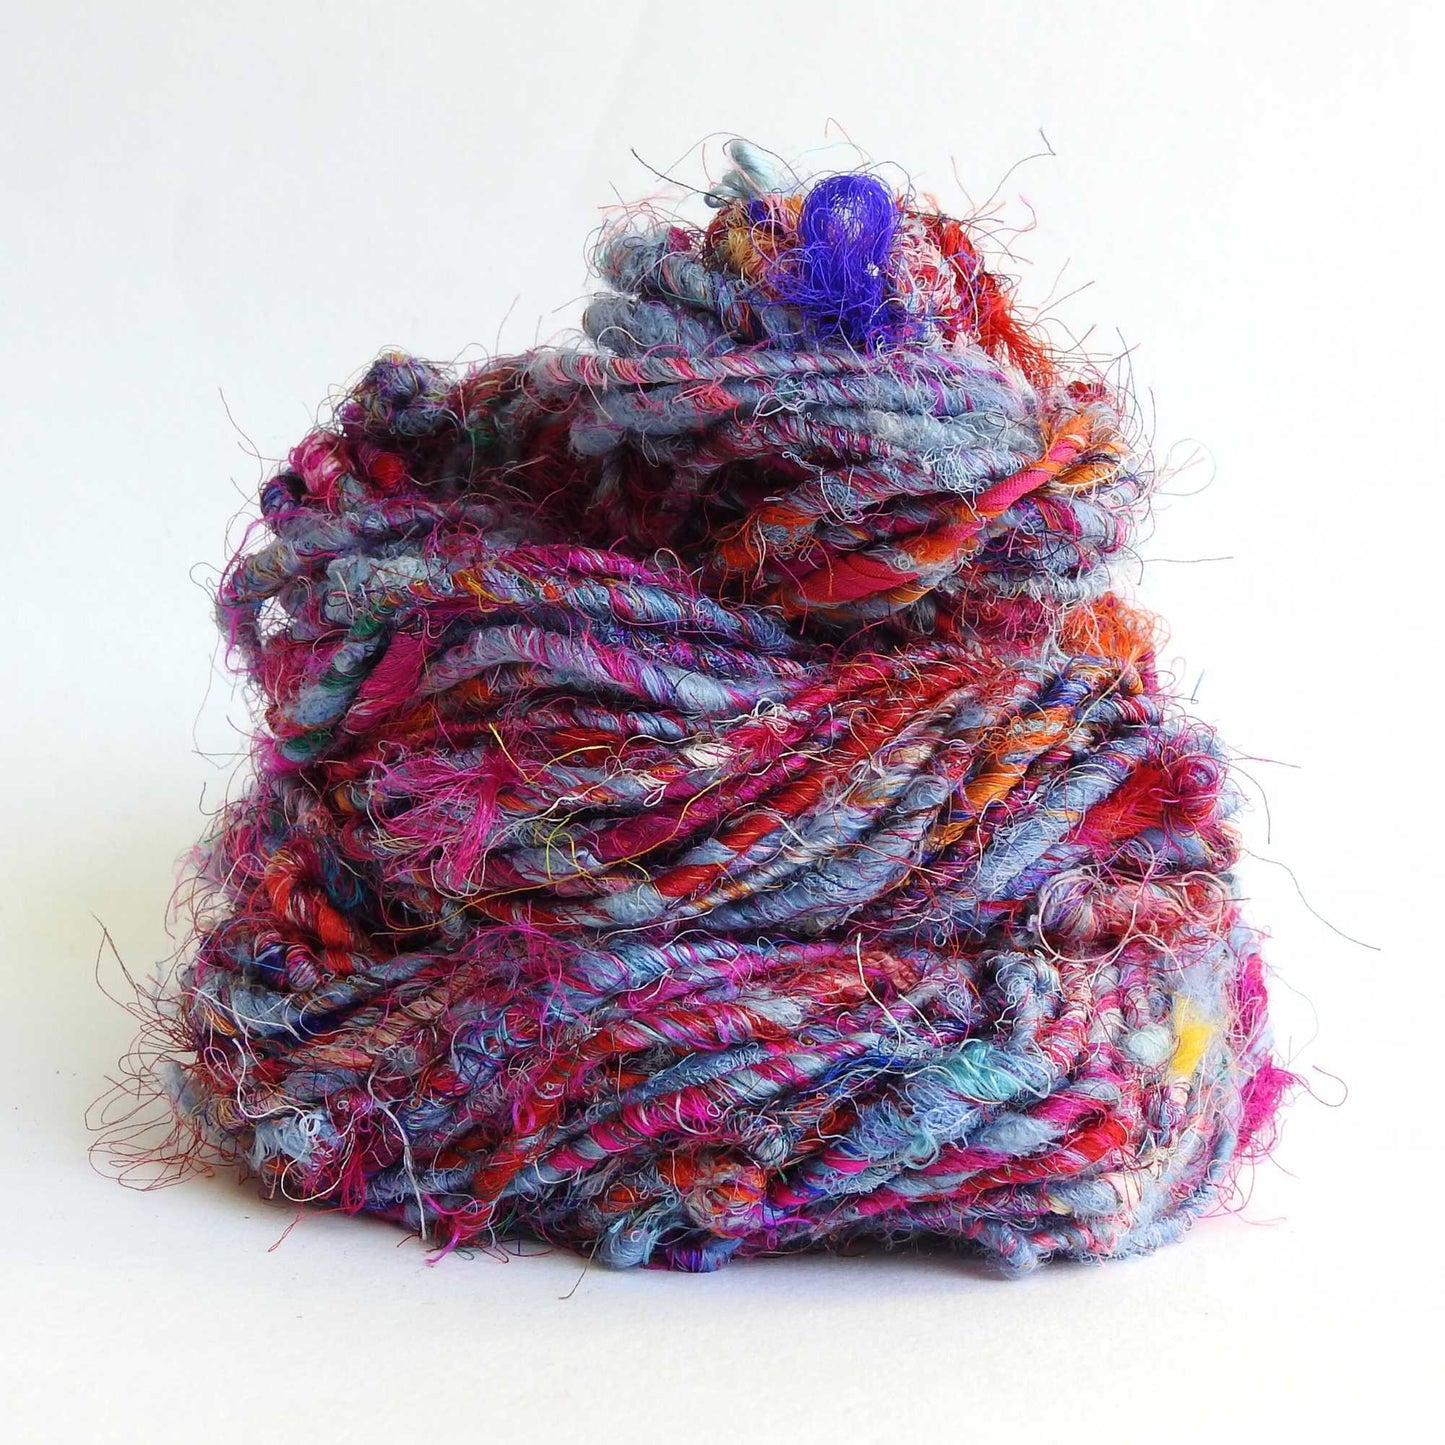 Ball of Recycled wool and silk yarn in purple heather. Soft, thick yarn for weaving, knitting, crochet and macrame. Hand spun, chunky natural yarn.